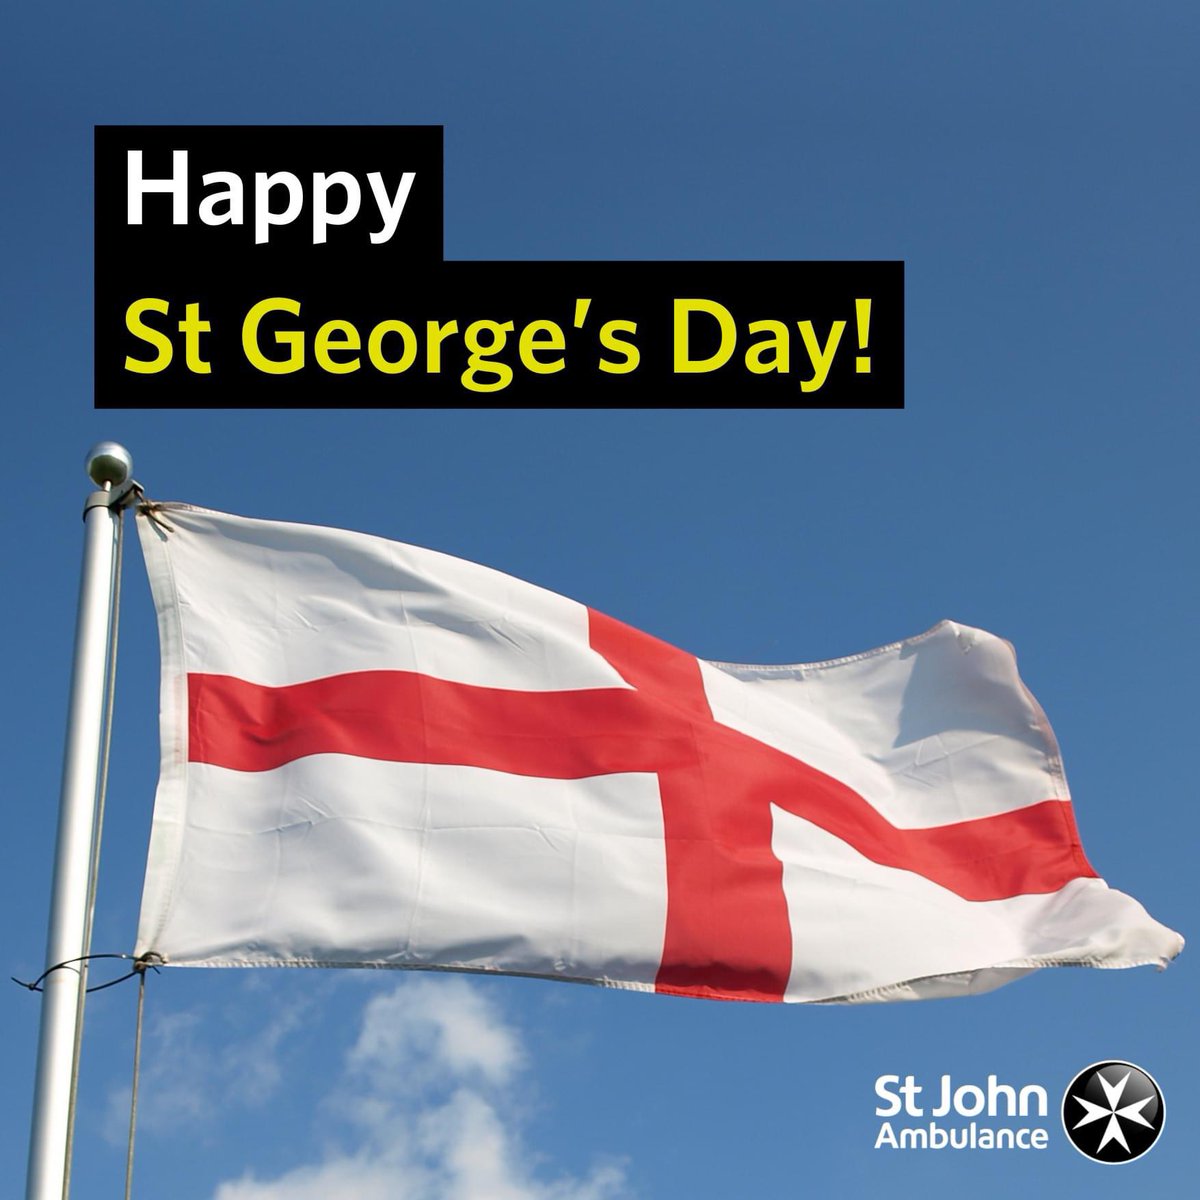 Wishing all our followers a Happy St George’s Day! 🏴󠁧󠁢󠁥󠁮󠁧󠁿